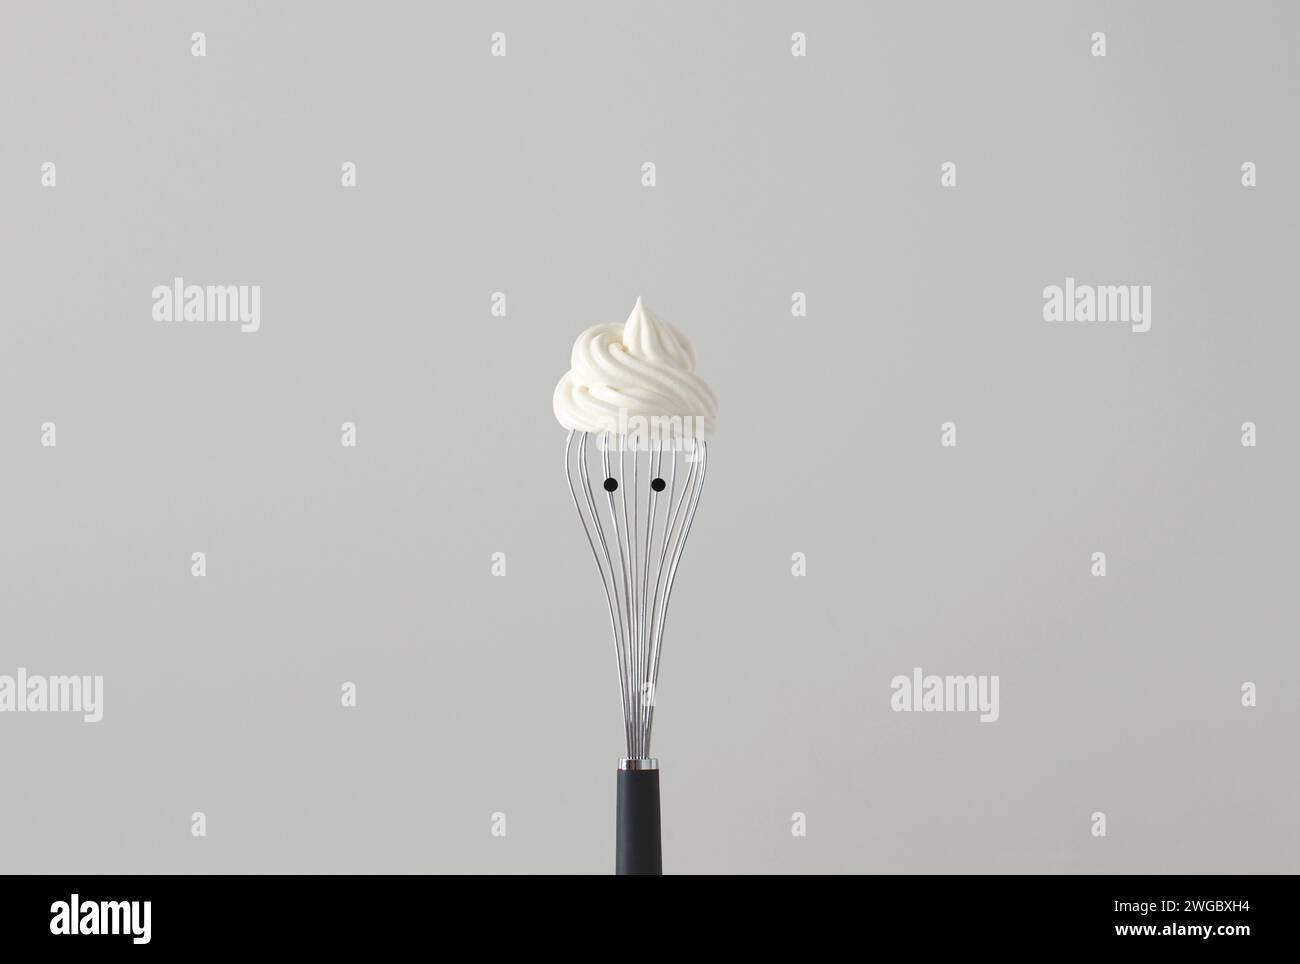 Conceptual portrait of a face with a cool hairstyle made from Whipped Cream On a Whisk With Black Dot Eyes Stock Photo